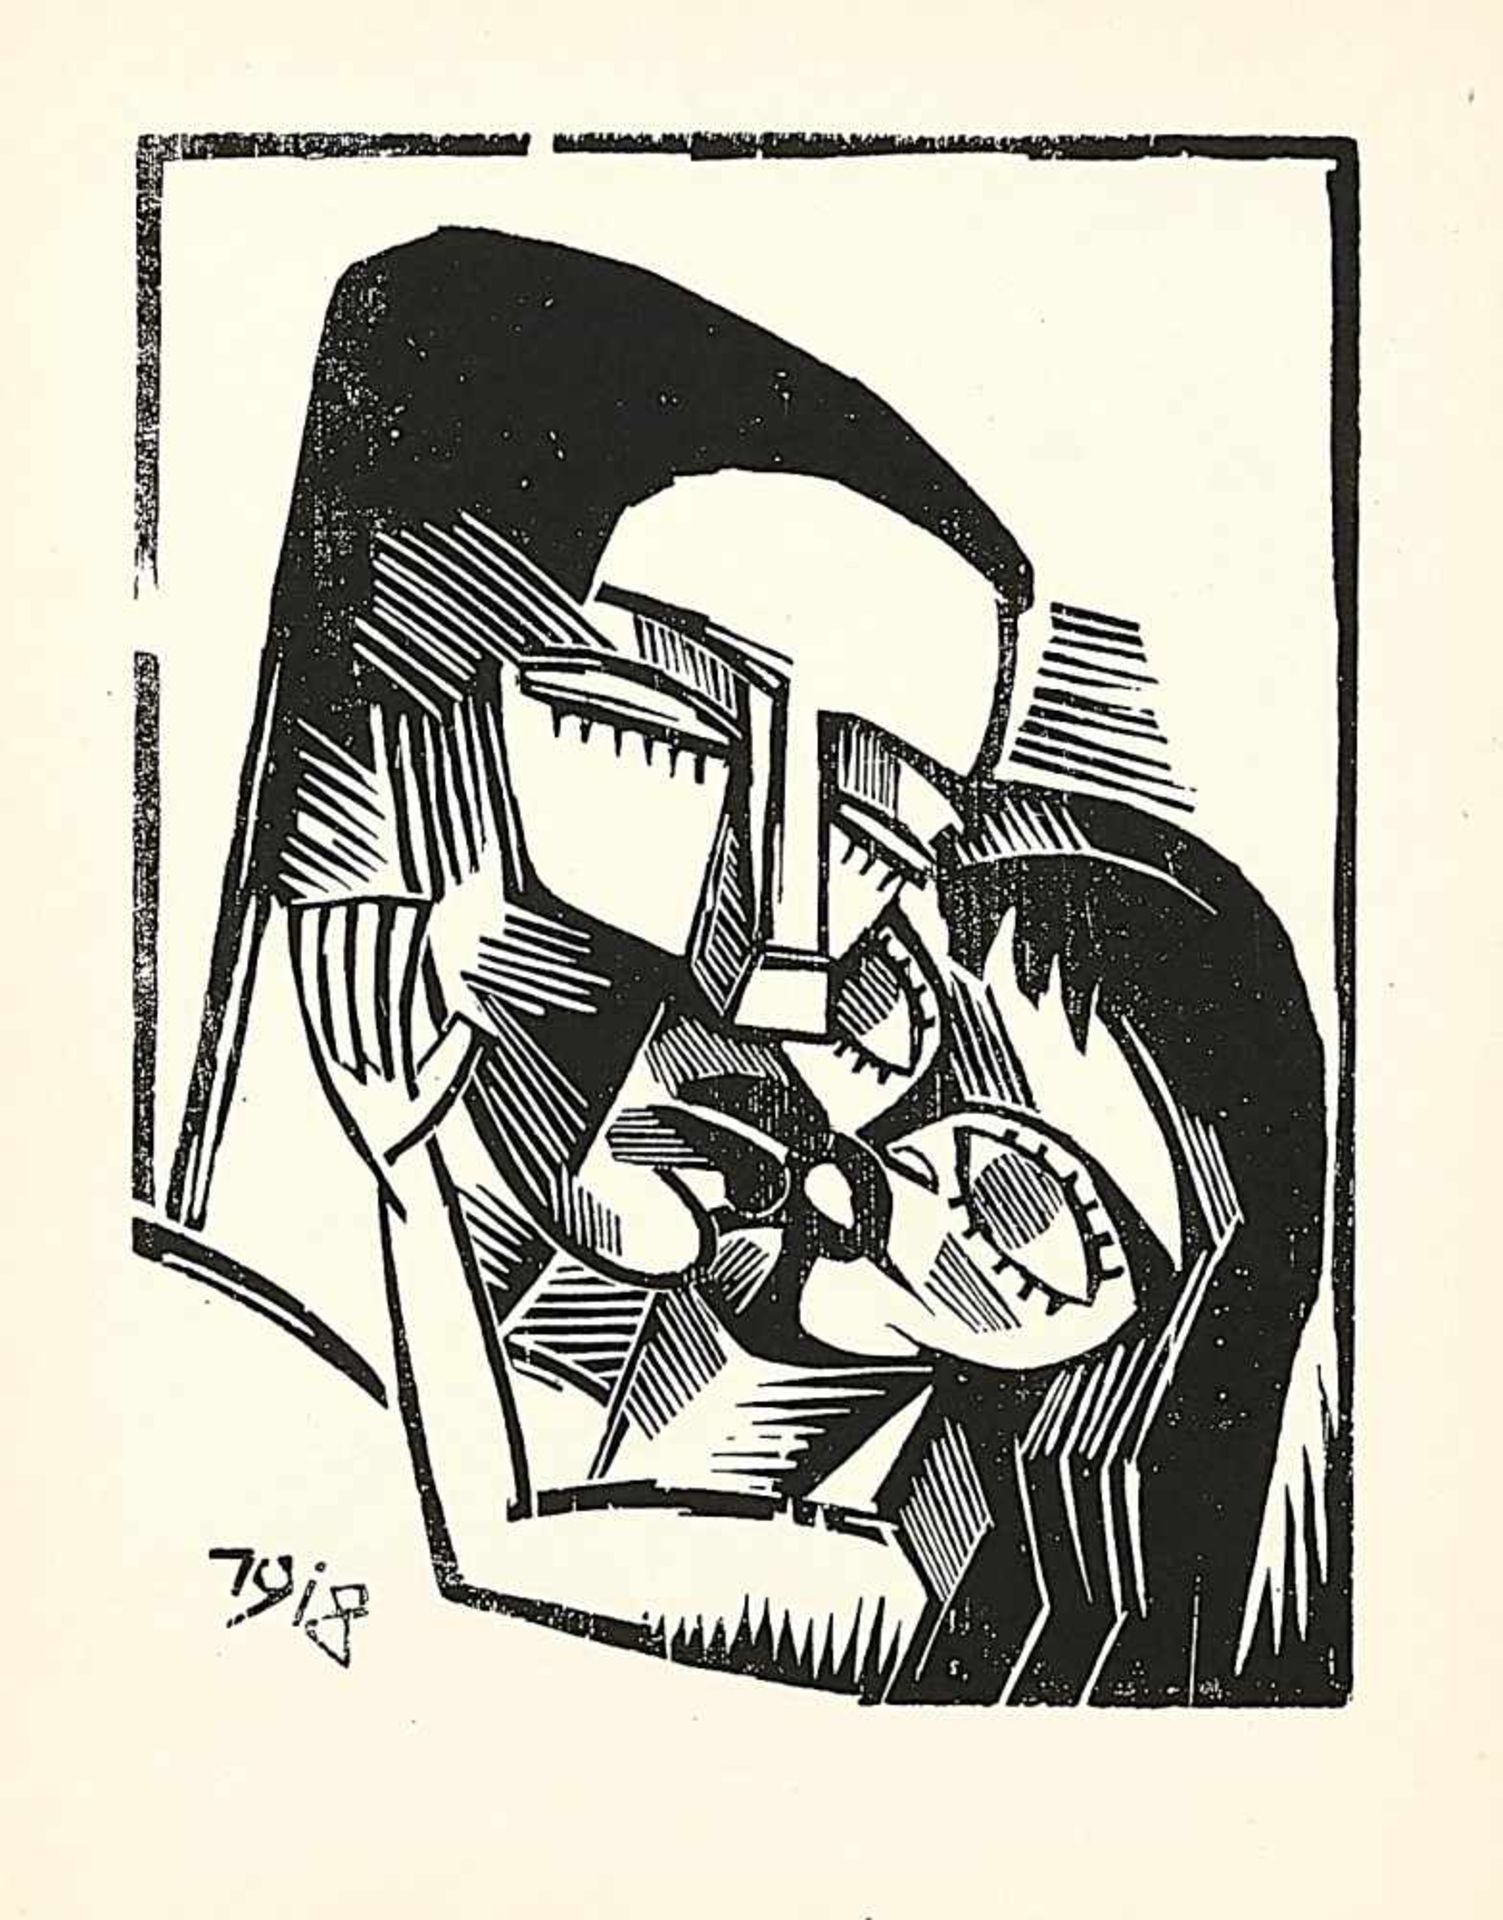 Karl Schmidt-Rottluff (1884-1976), after, ''9 woodcuts'', reduced reprints of the 9 woodcuts